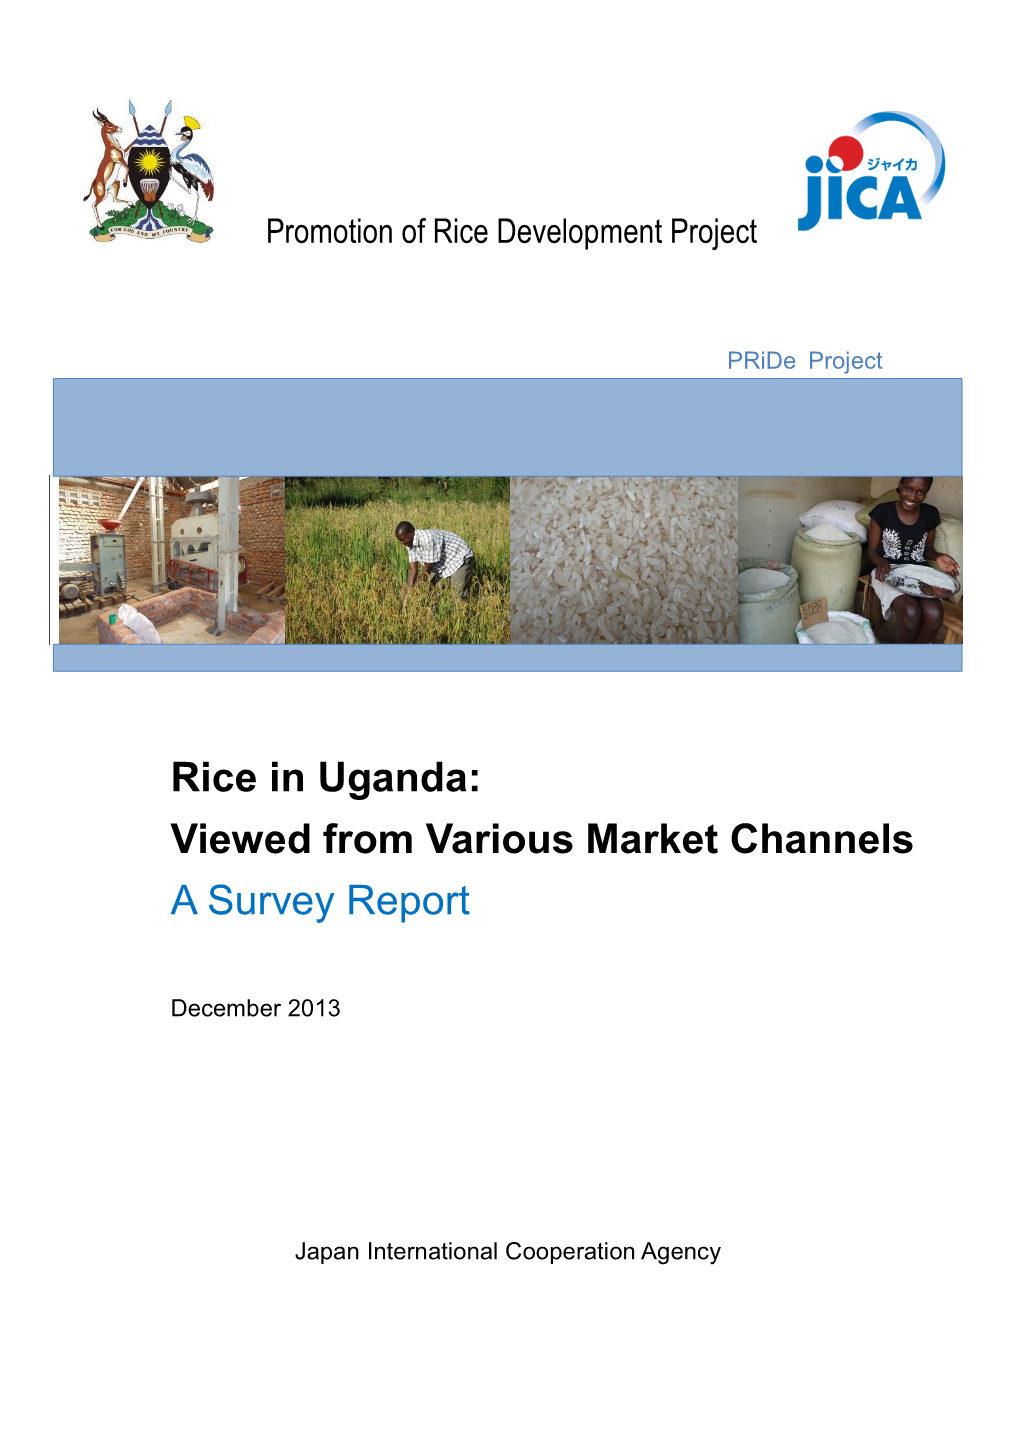 Rice in Uganda: Viewed from Various Market Channels a Survey Report